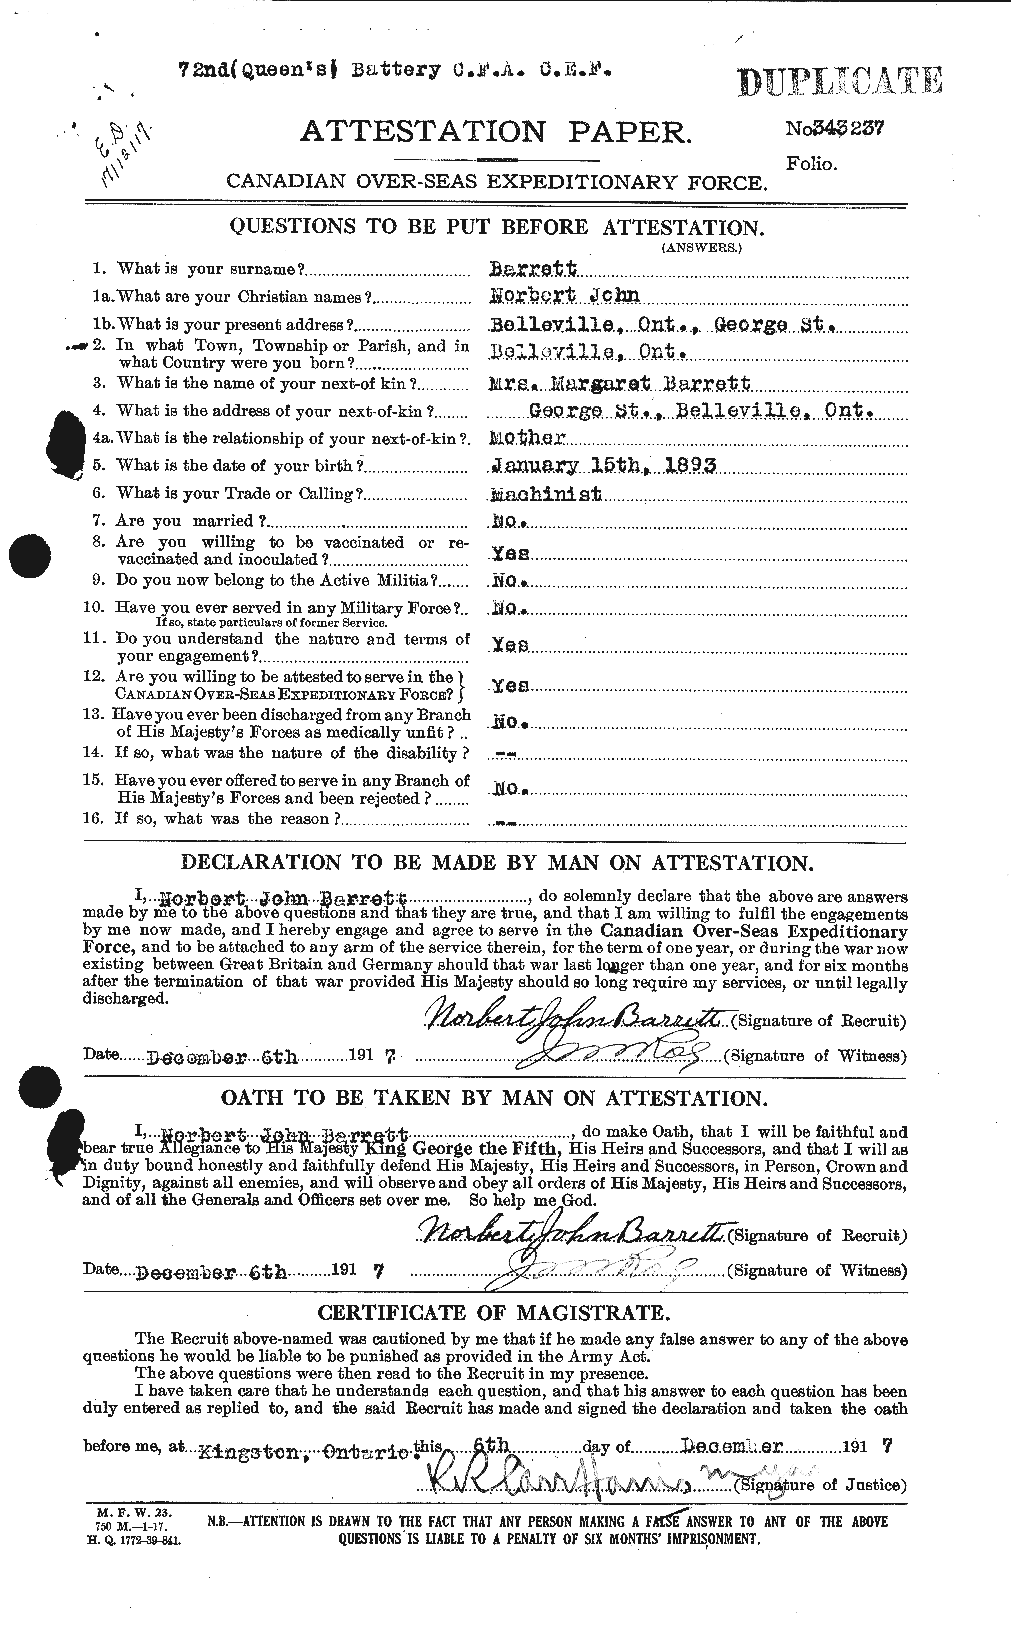 Personnel Records of the First World War - CEF 220211a